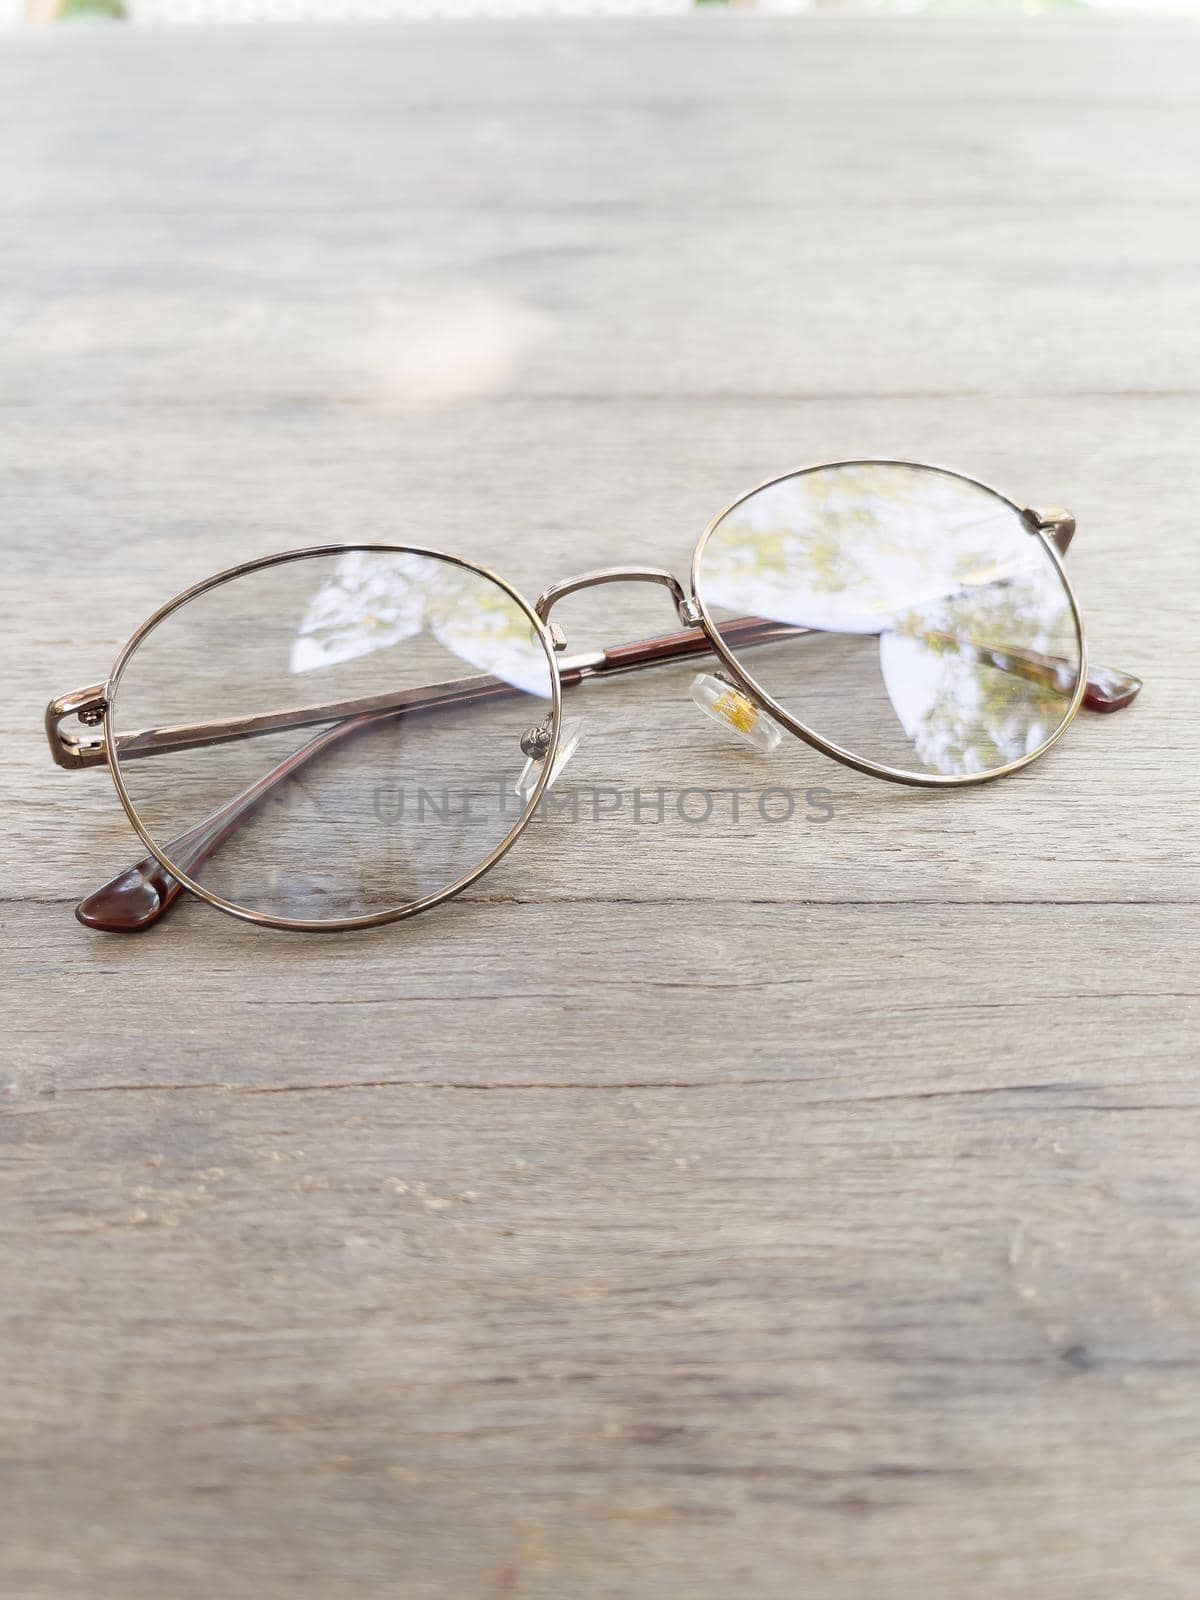 Eyeglasses on old wooden table, stock photo